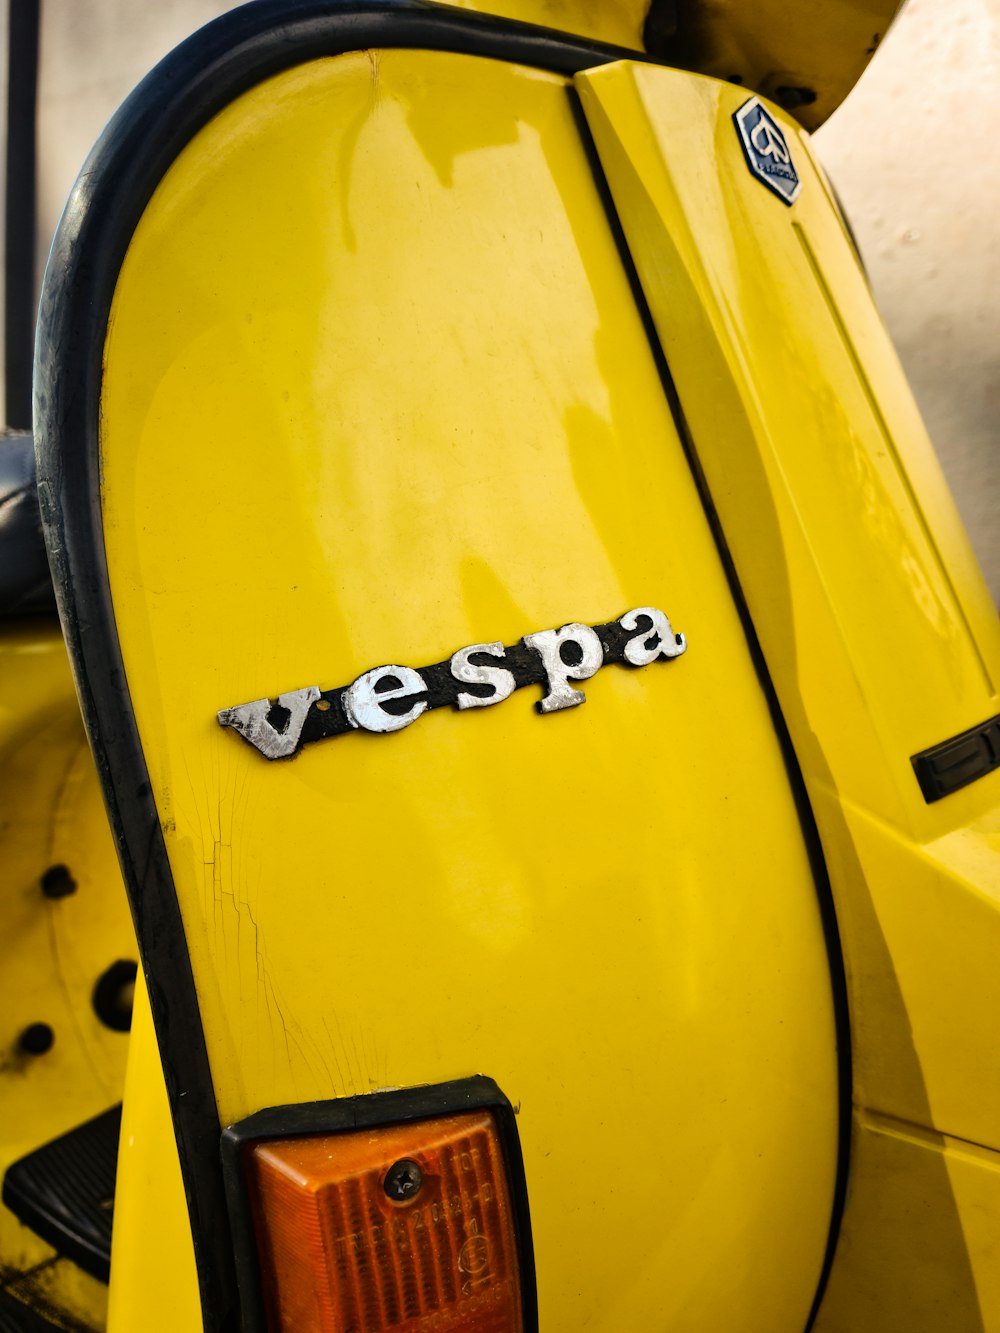 a yellow vespa scooter with the word vespa on it